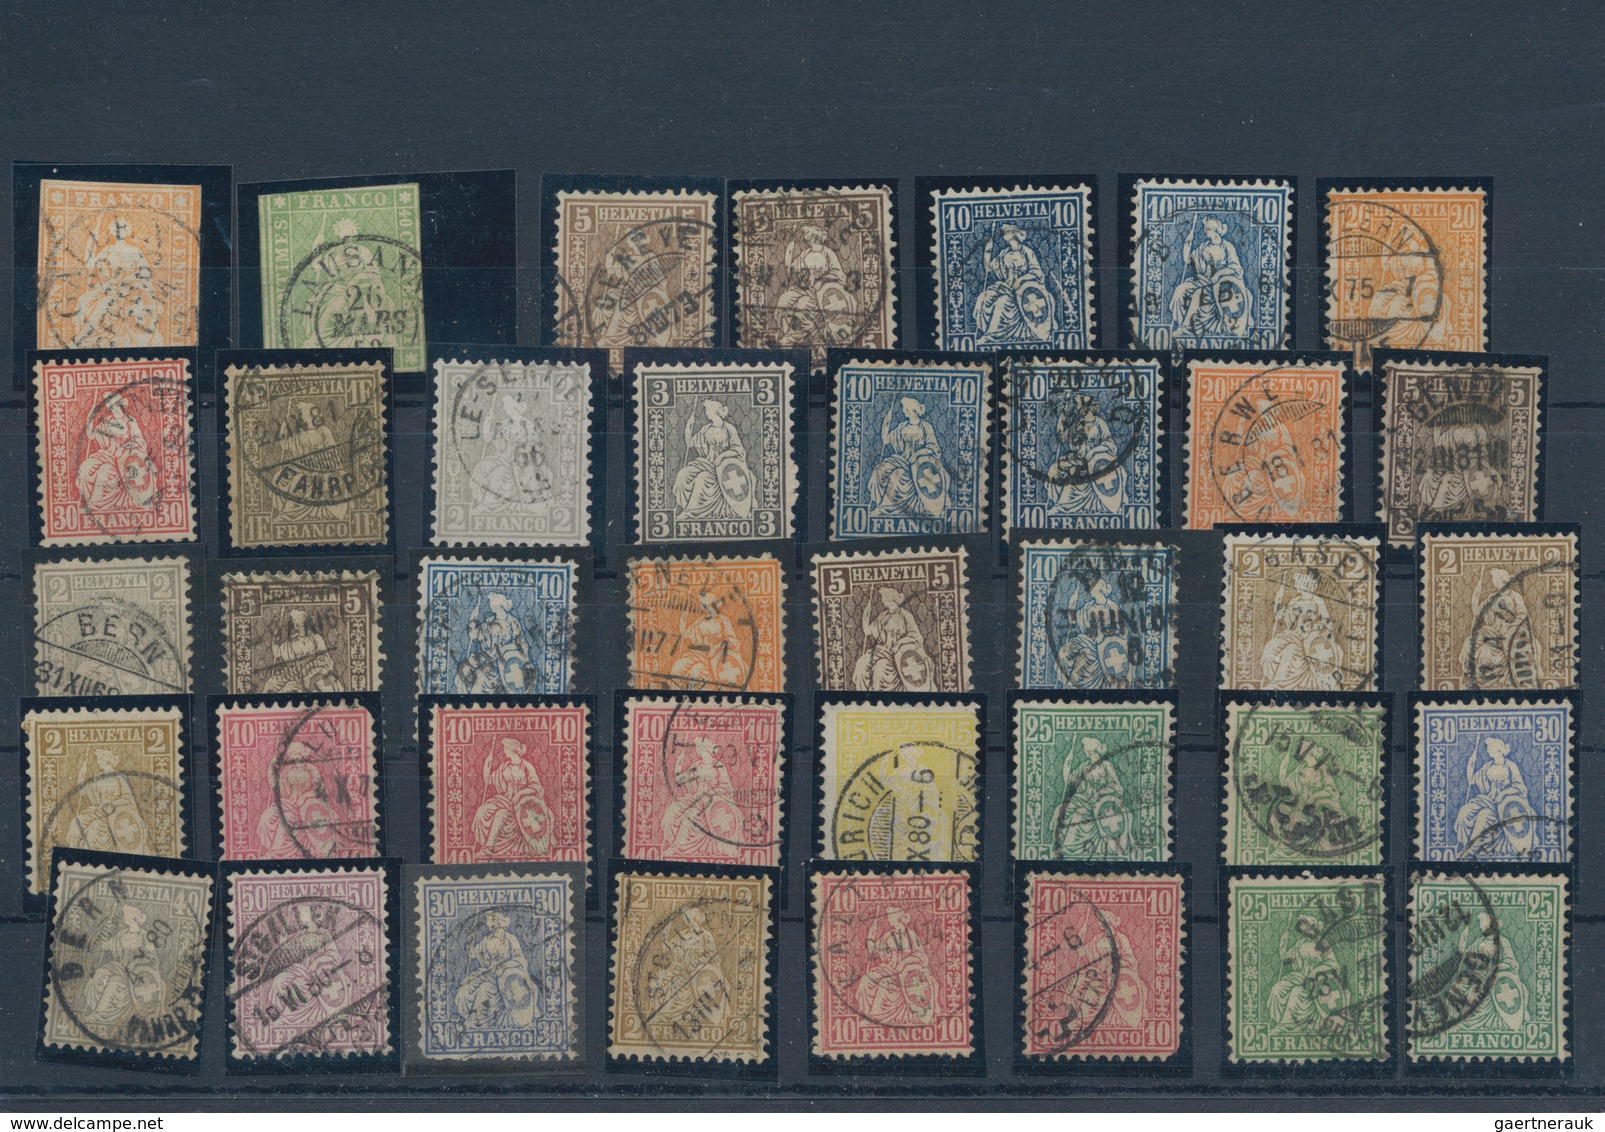 Schweiz: 1850-1930 Ca., Small Collection On Cards Starting Imperf Issues In Different Types, Most Fi - Lotes/Colecciones